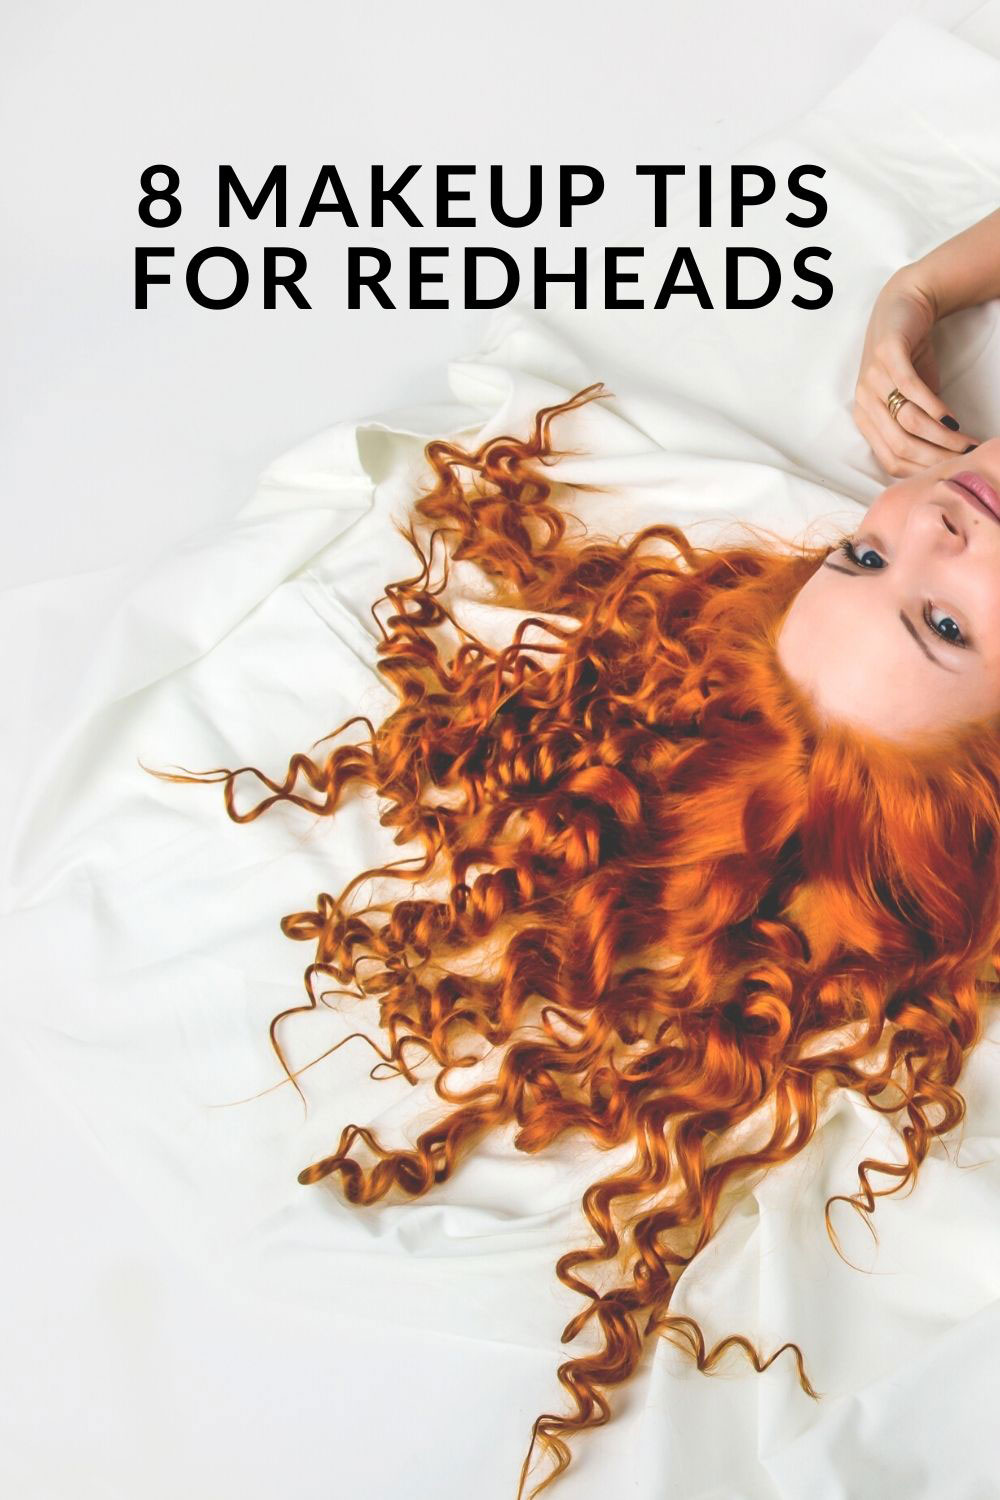 Makeup for Redheads: 8 of the best beauty tips for people with red hair